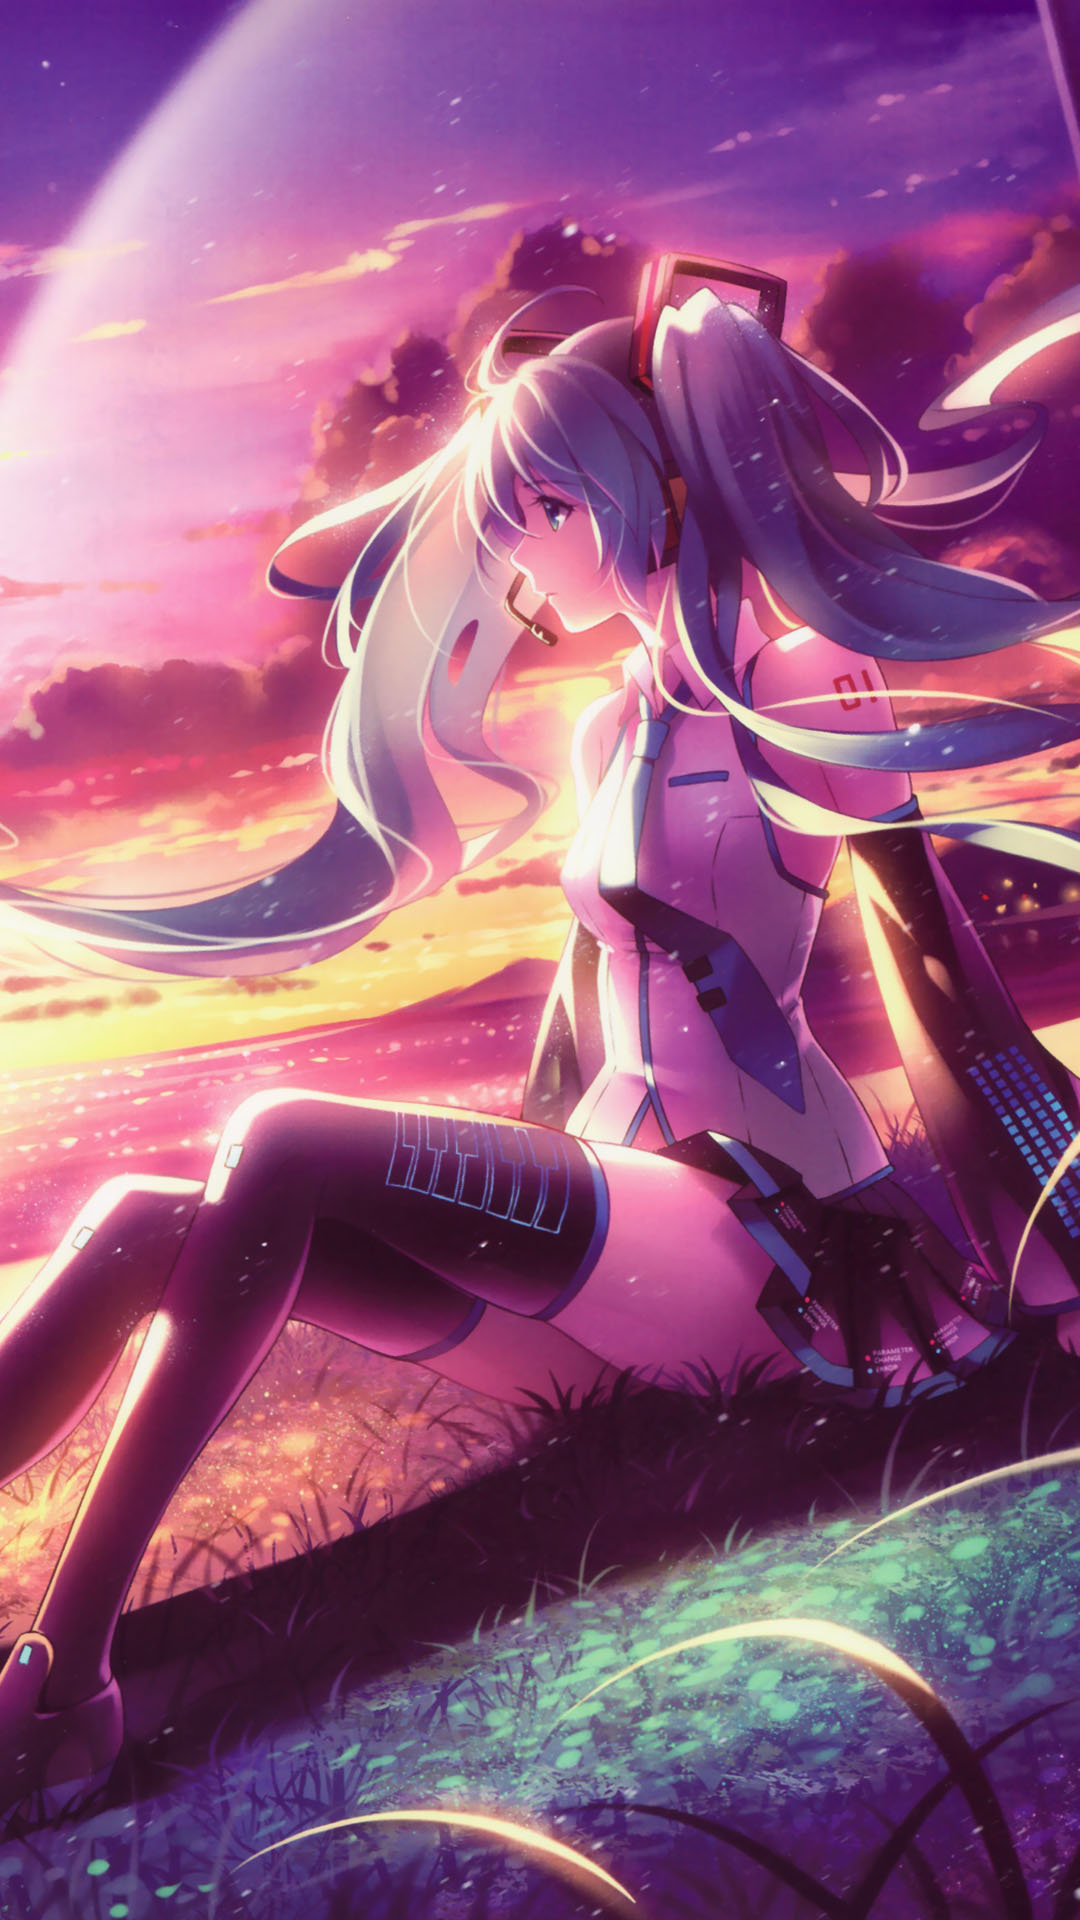 Vocaloid Anime Iphone Wallpapers Iphone Wallpapers